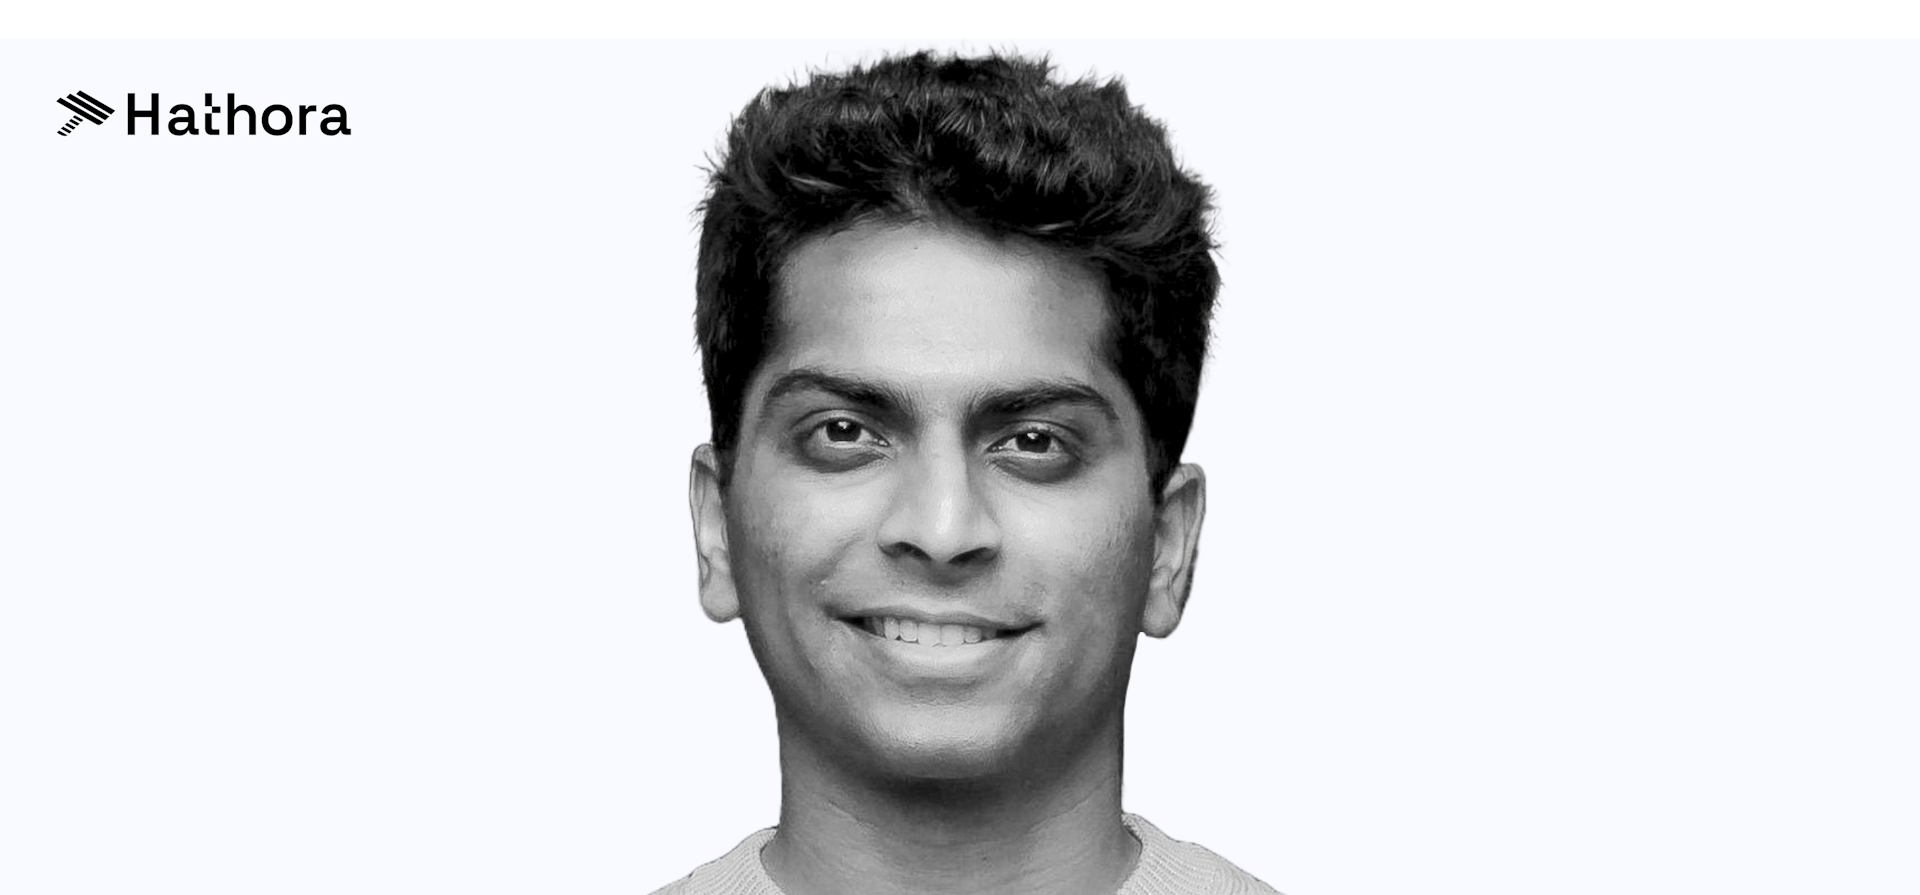 Siddharth Dhulipalla, co-founder and CEO of Hathora